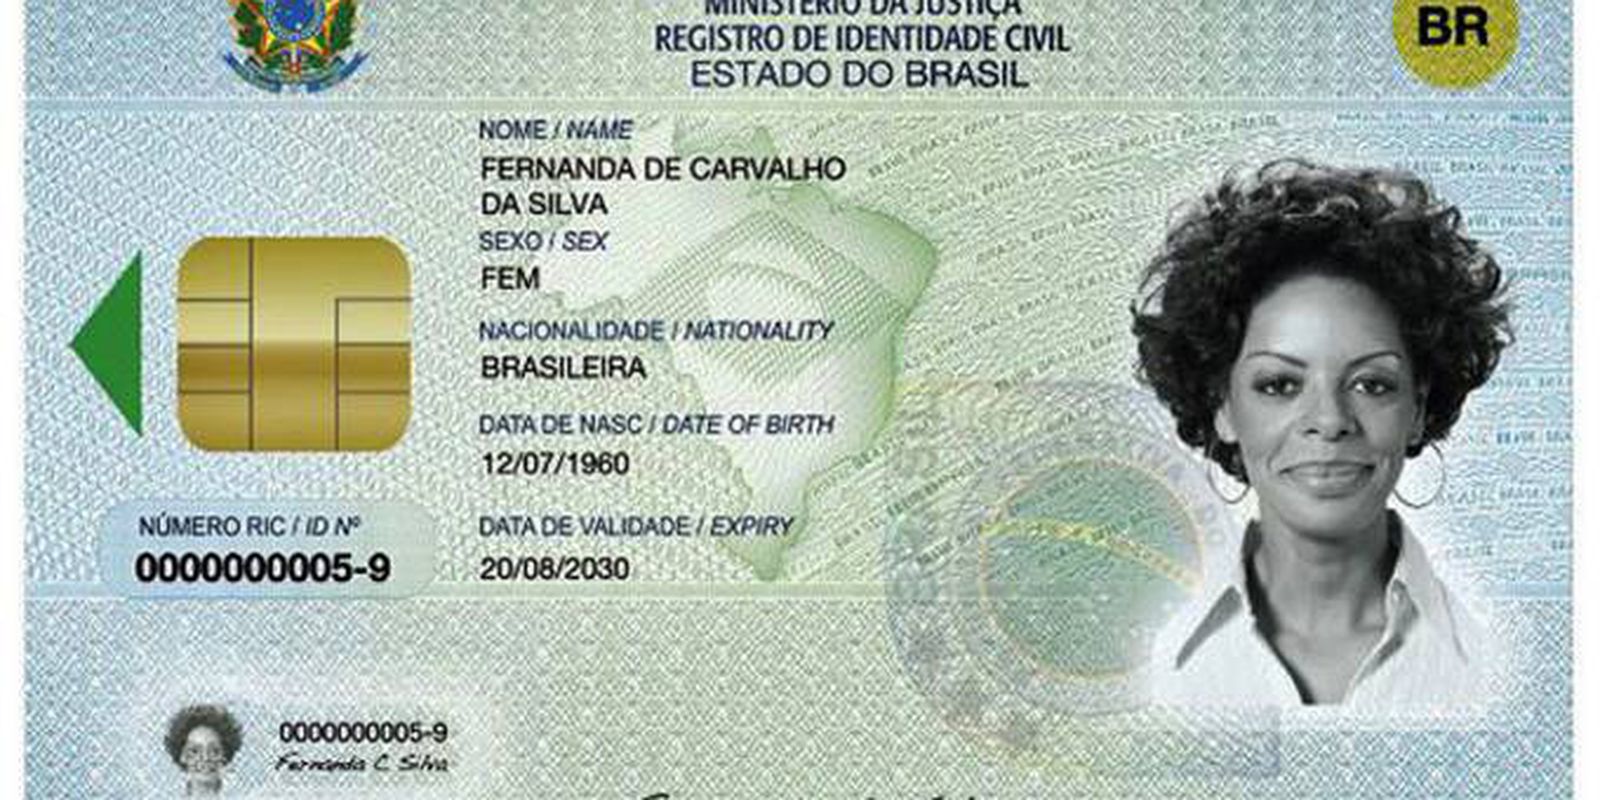 Rio Grande do Sul will be the first state to issue a new identity